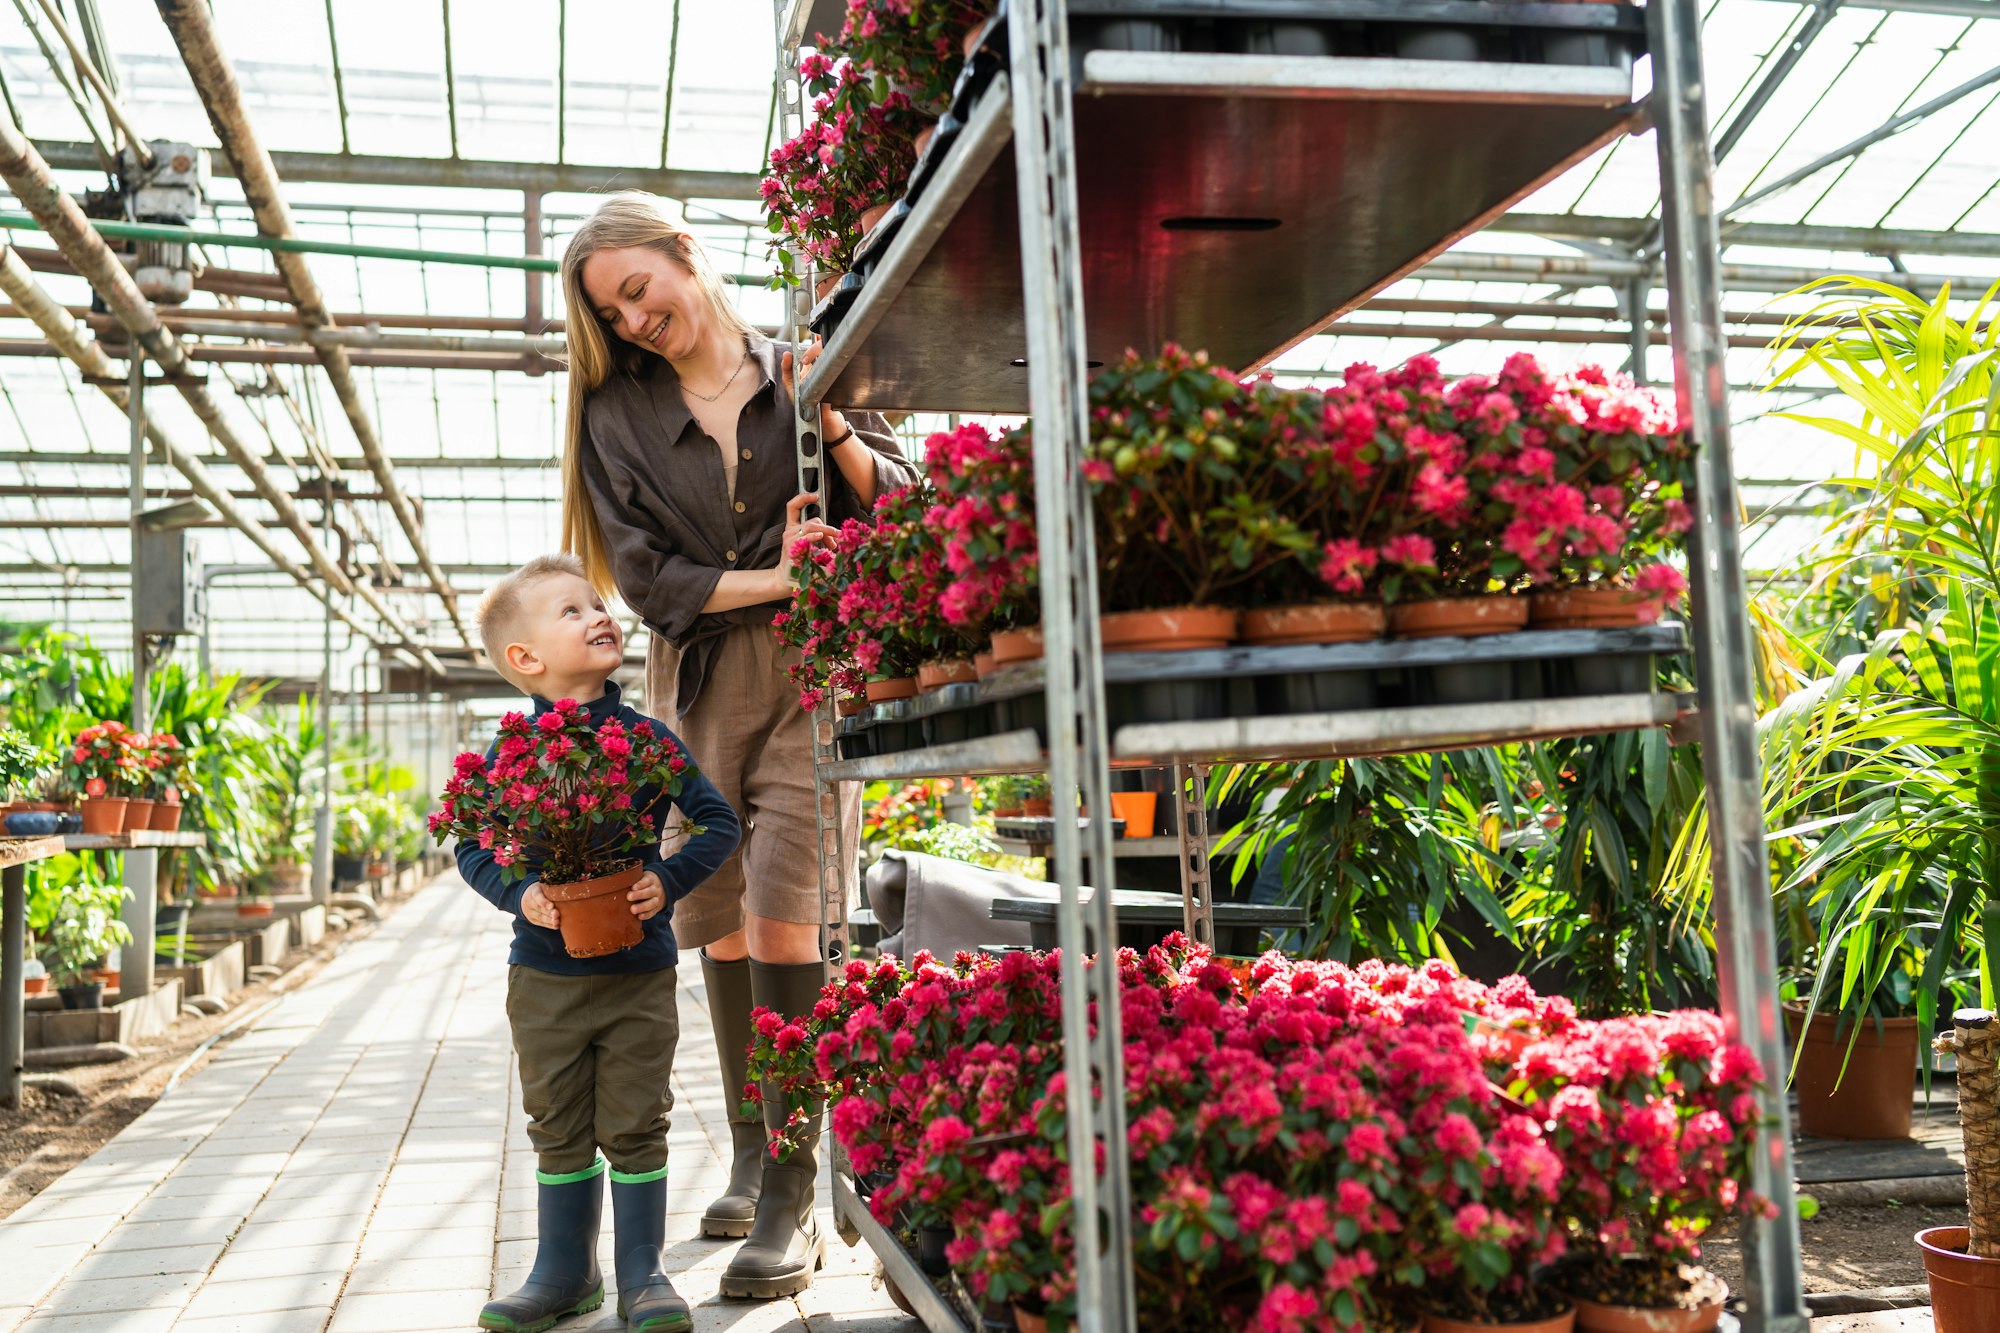 Little boy with a flower in a pot and his mom, a florist who pulls a cart with flowers